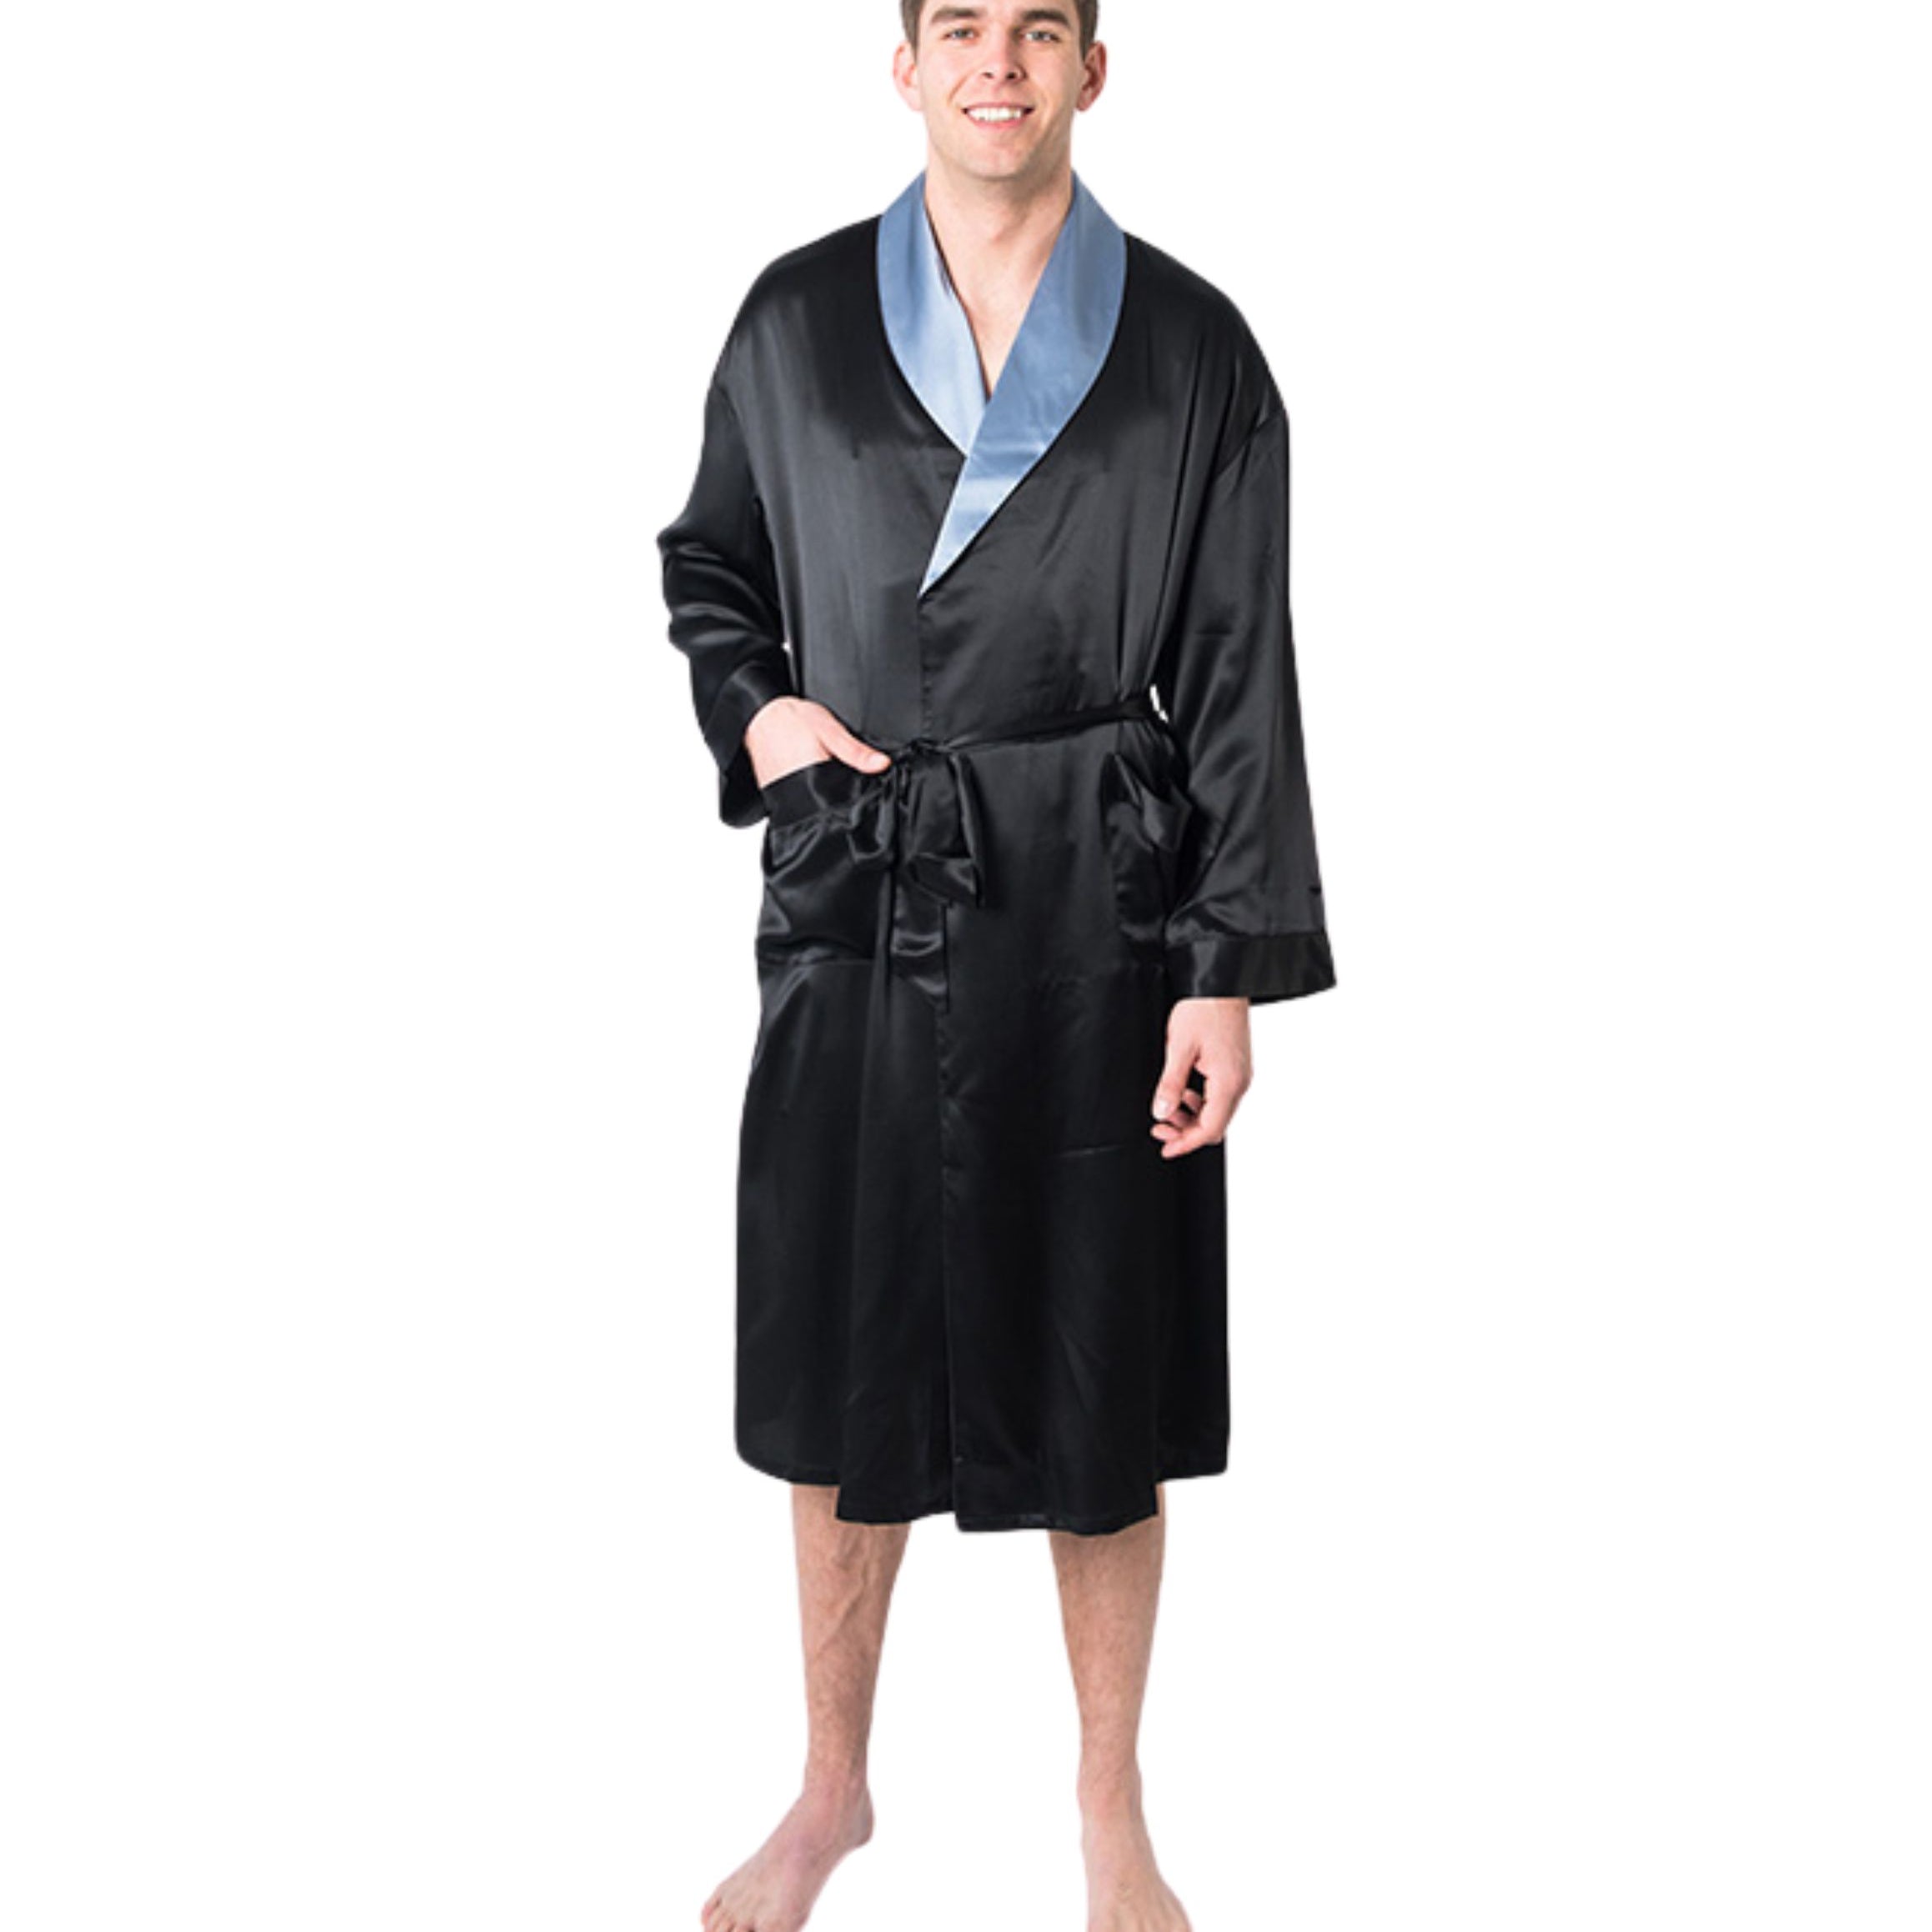  Men's Black Robe with Twilight Collar - Men's Black Robe with Twilight Collar -  -  - Luxurious Fine Silk by Forsters Finery